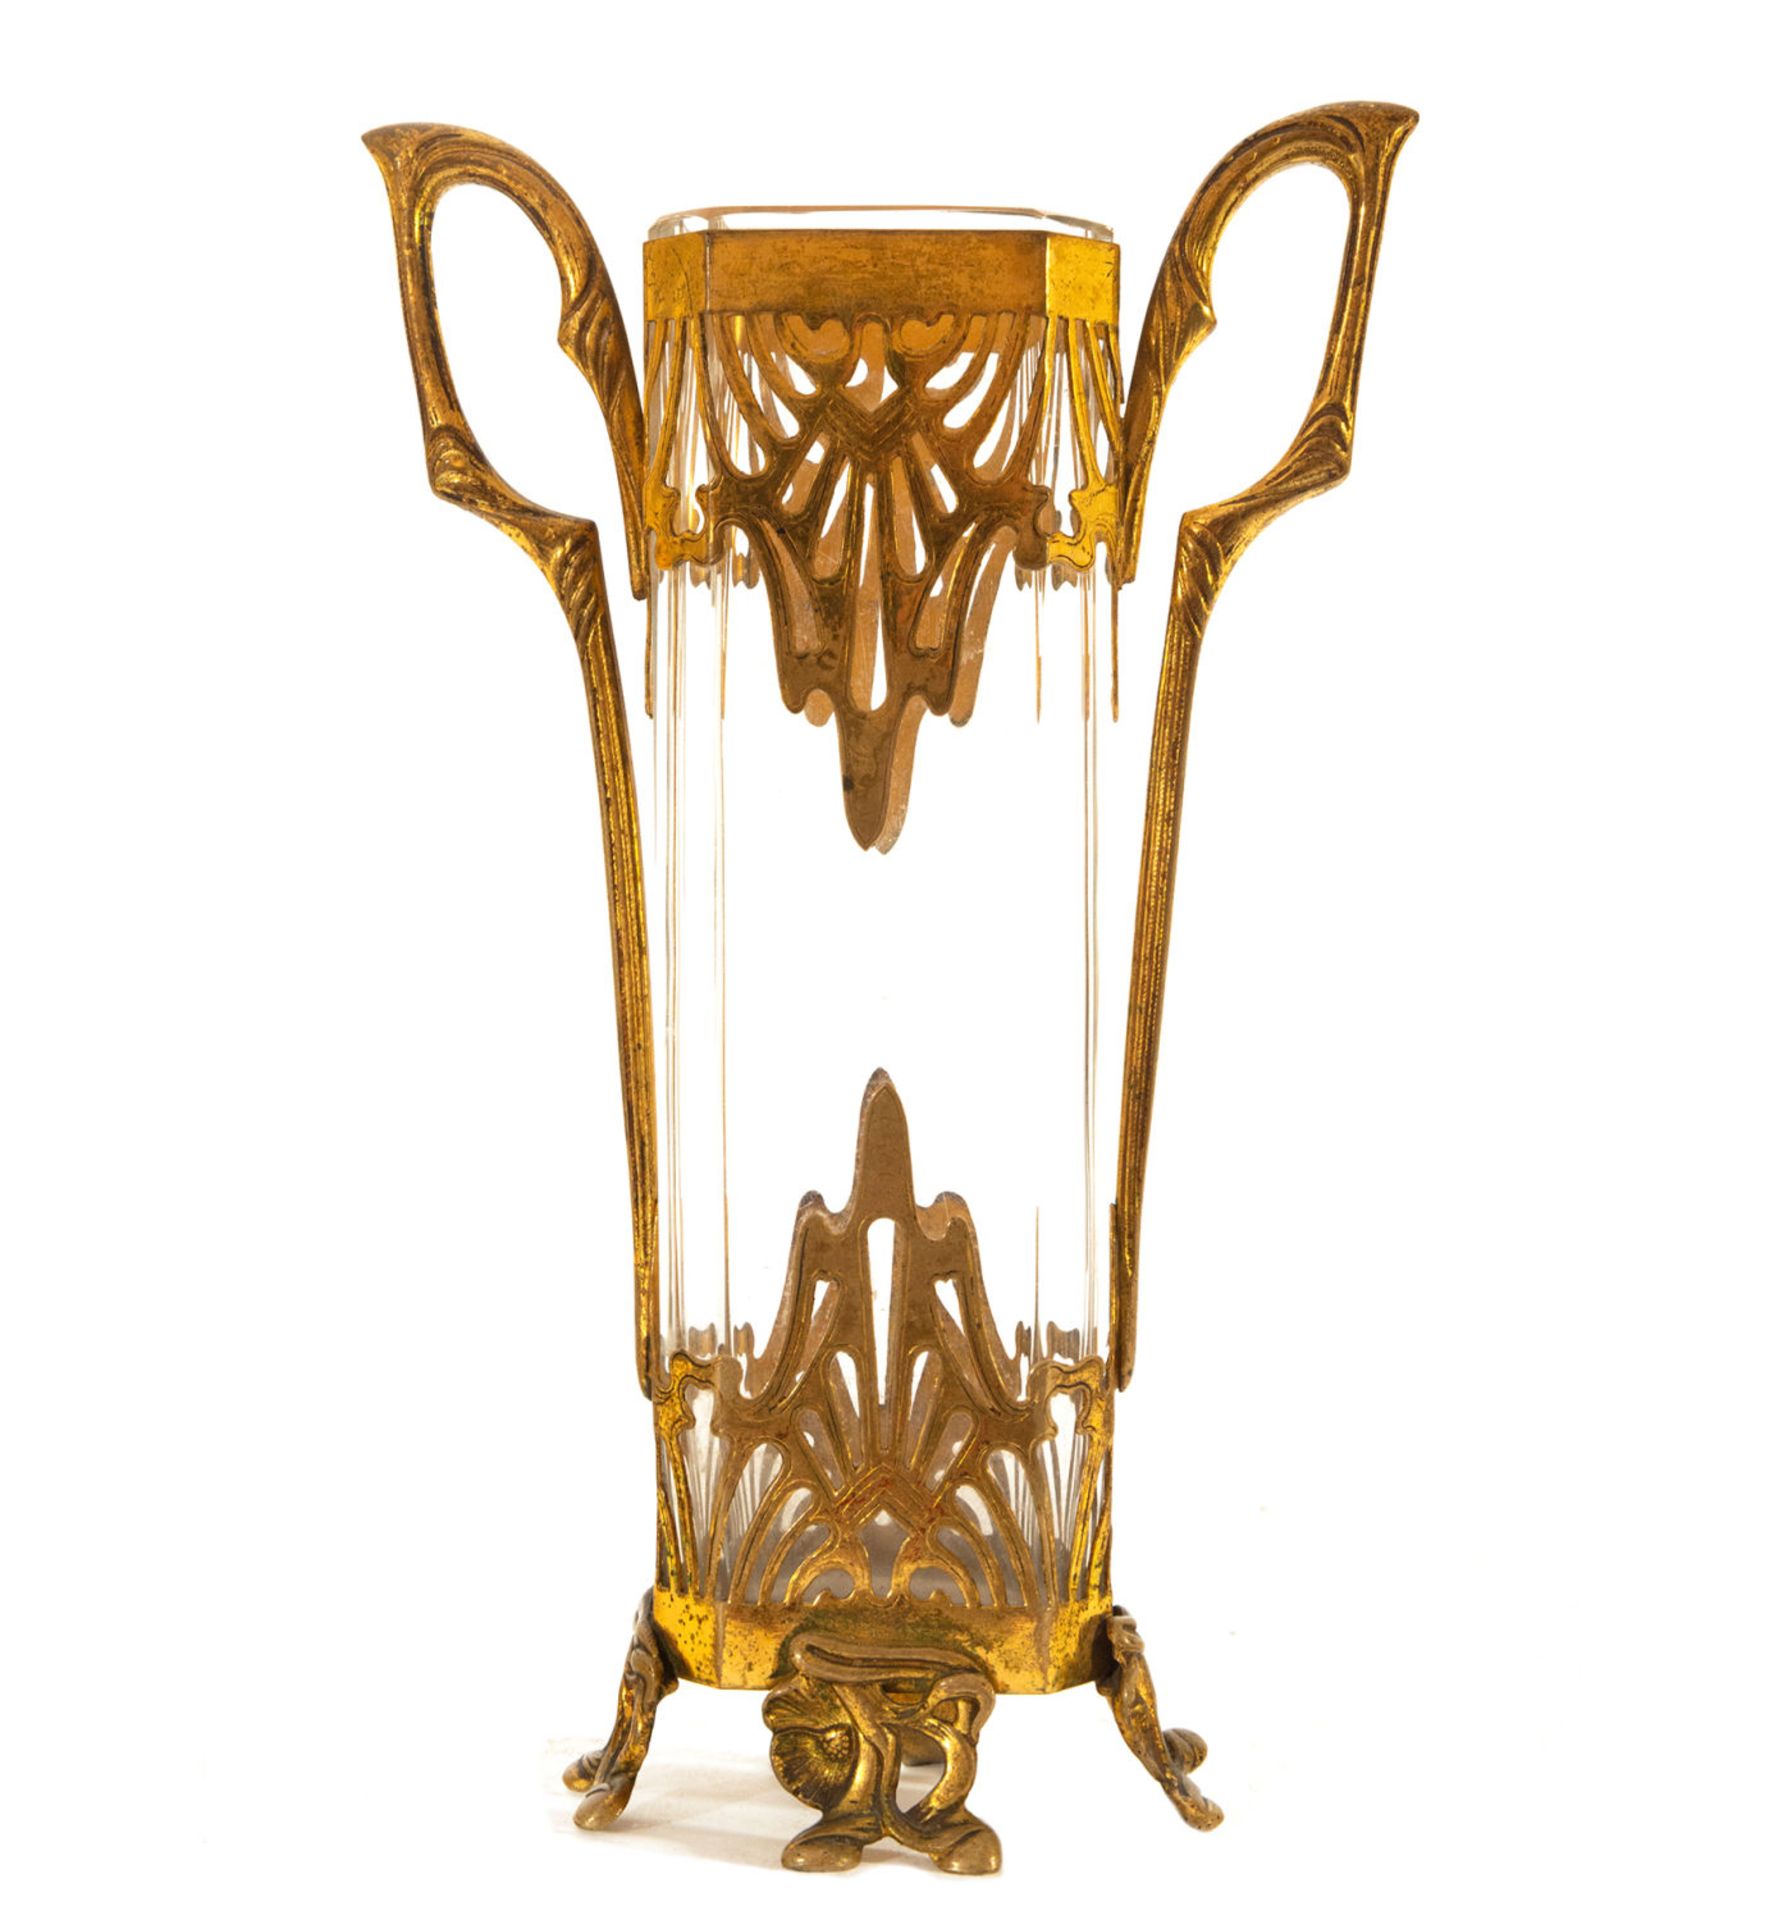 Art Nouveau Vase in Crystal and Gilt Bronze, Austria, early 20th century - Image 6 of 7